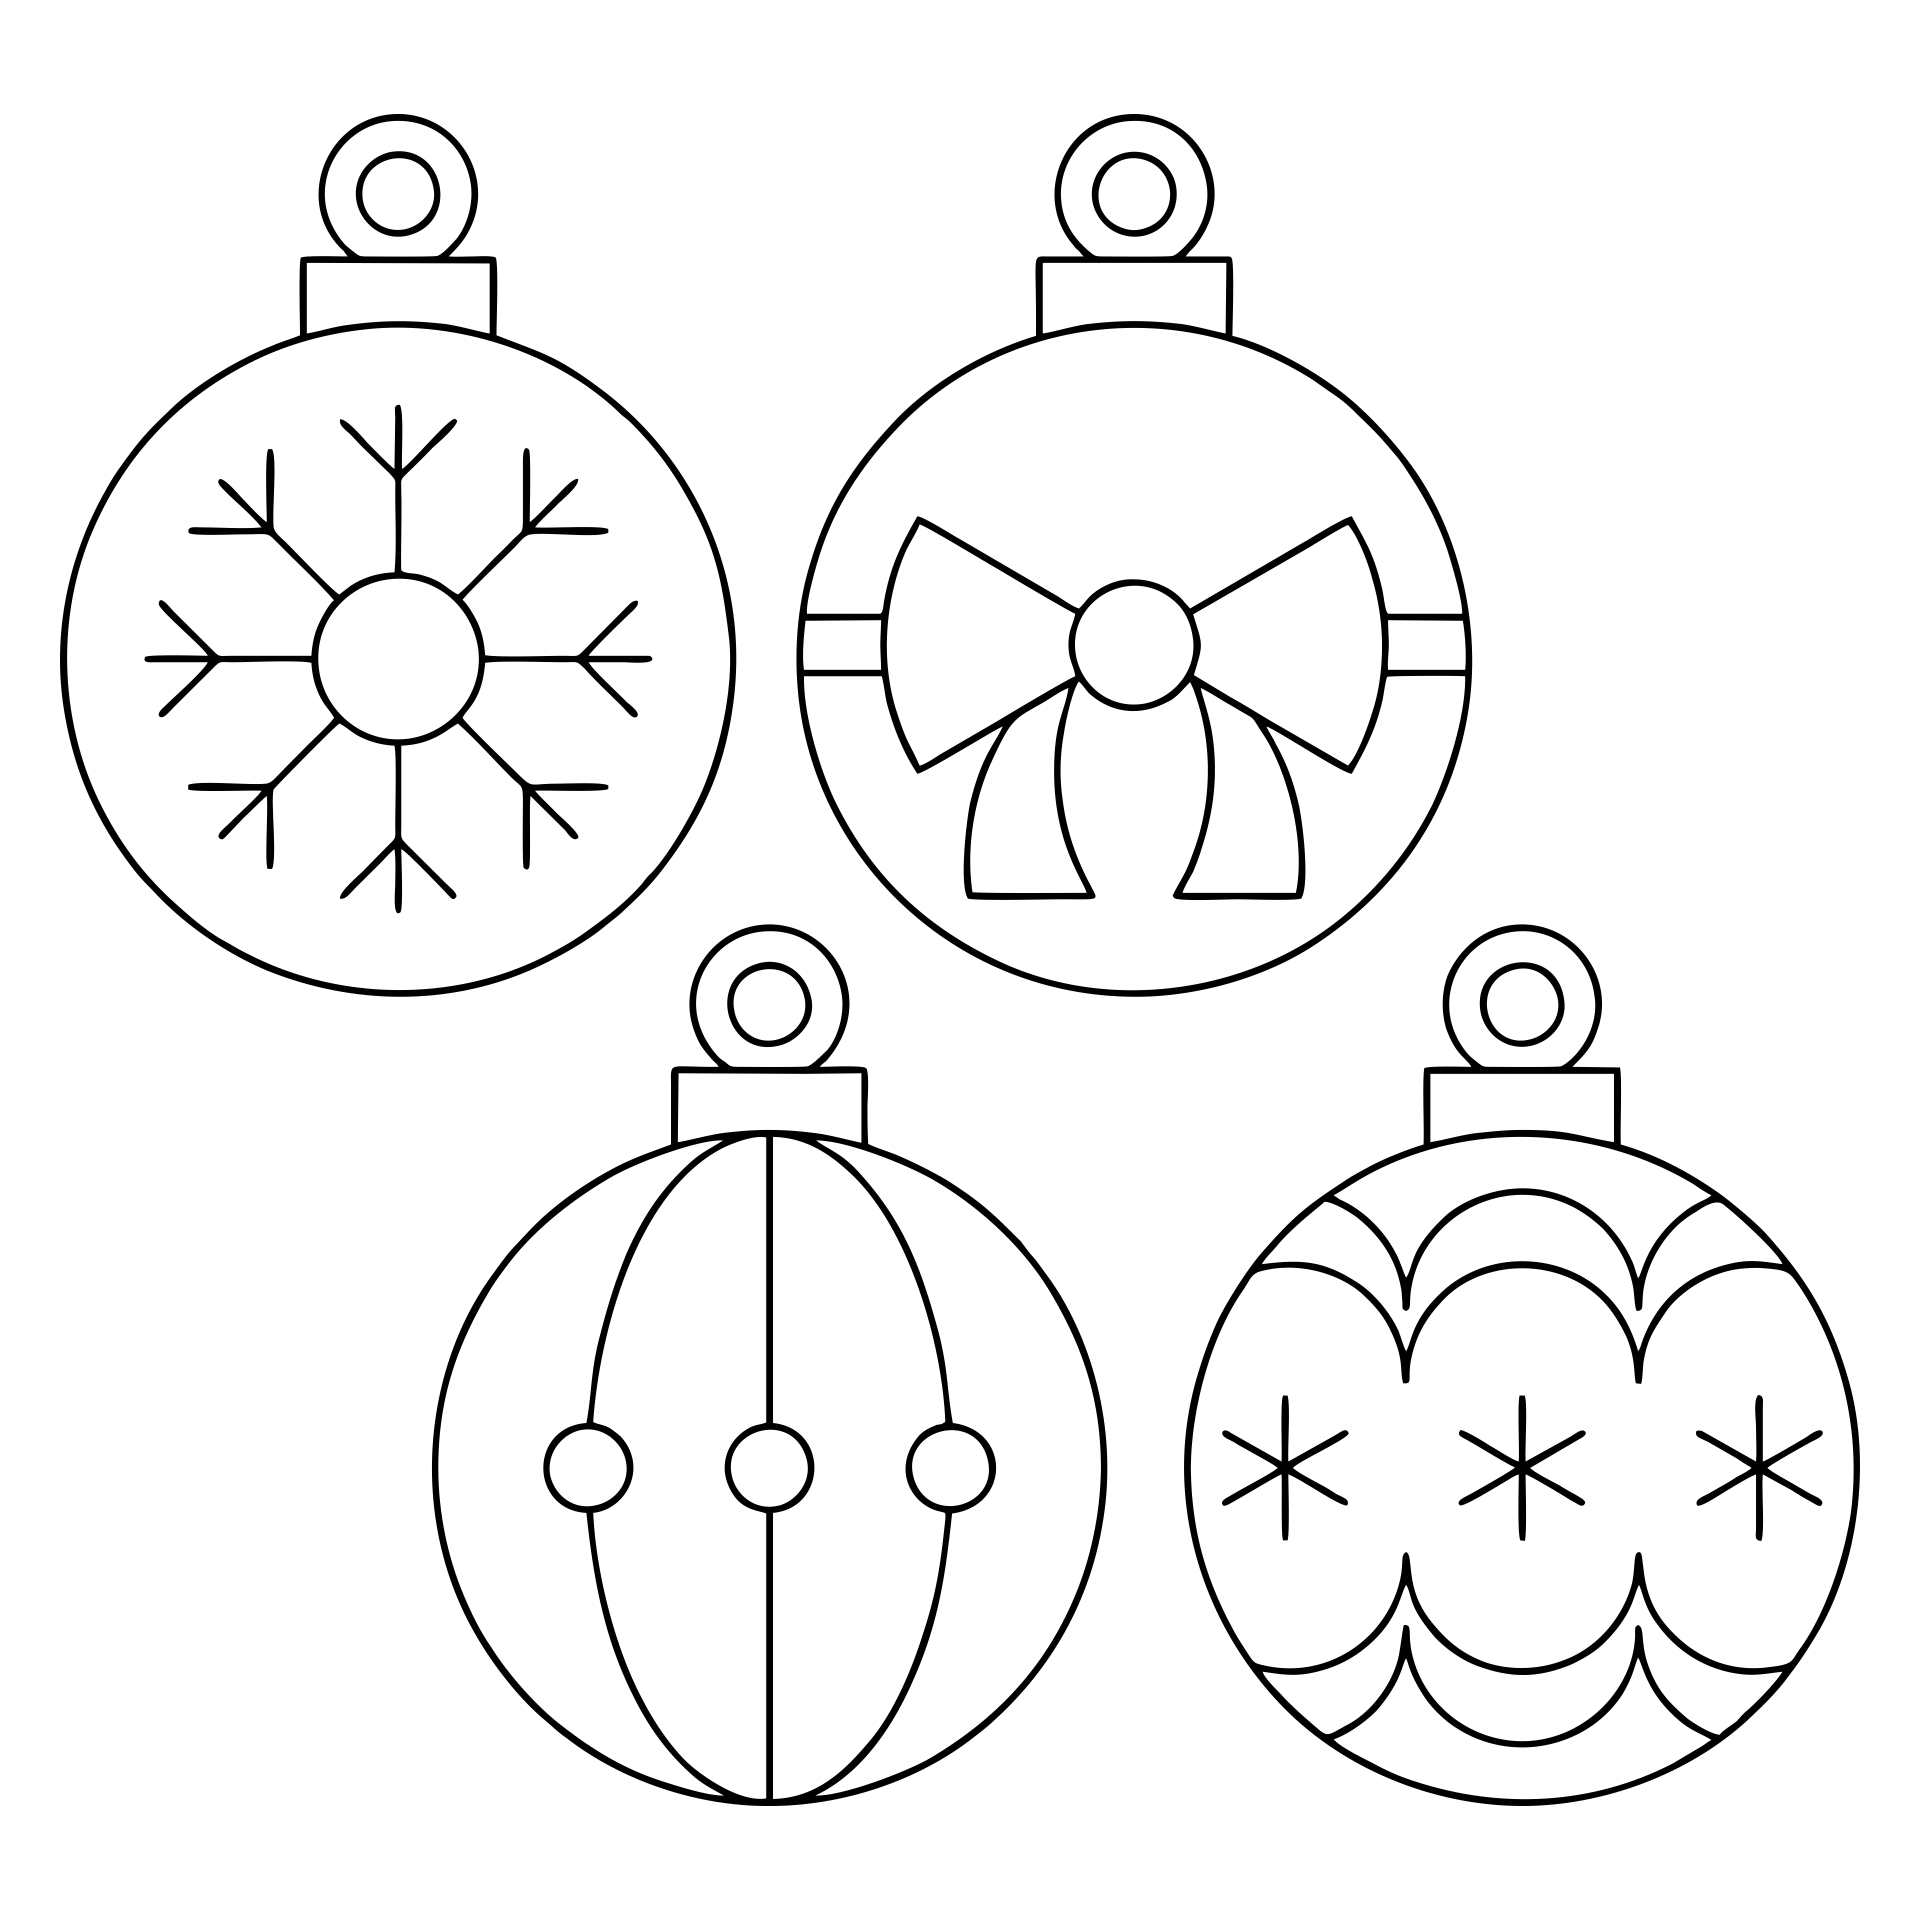 7 Best Images of Printable Christmas Ornament Templates - Christmas ...